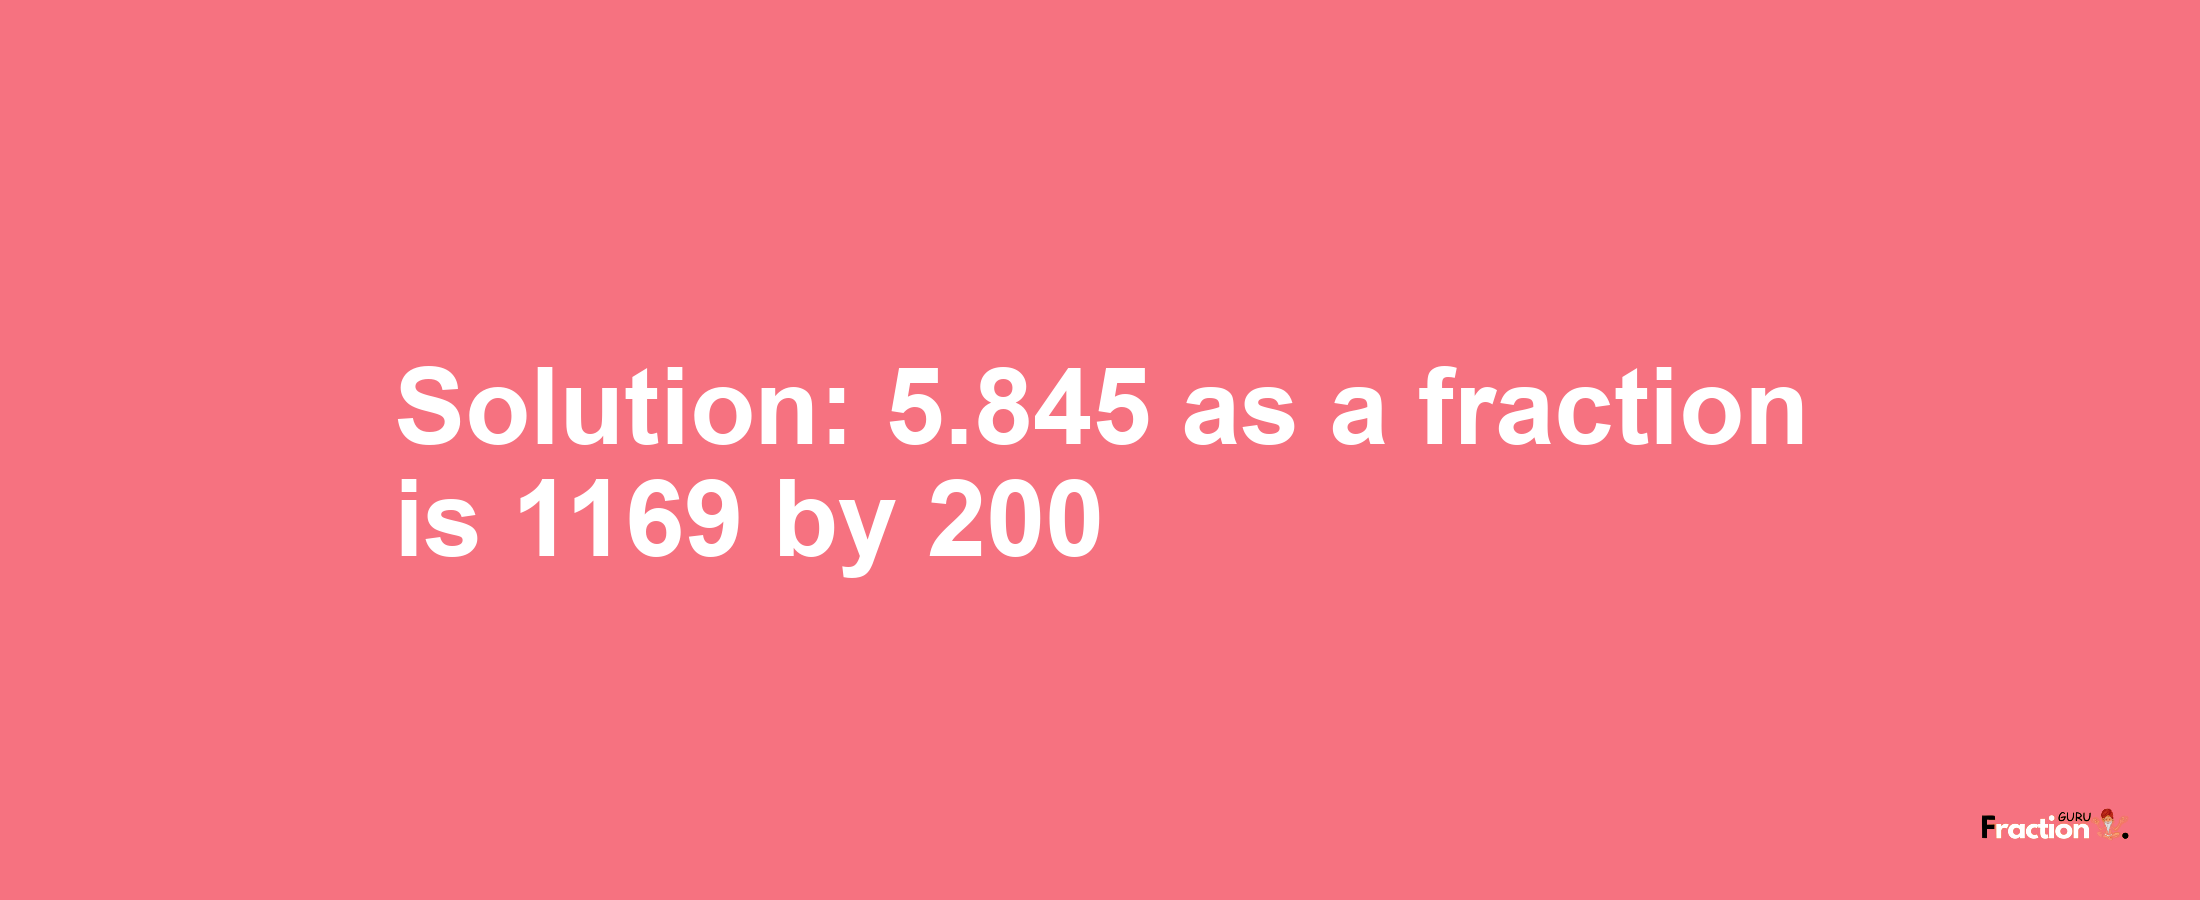 Solution:5.845 as a fraction is 1169/200